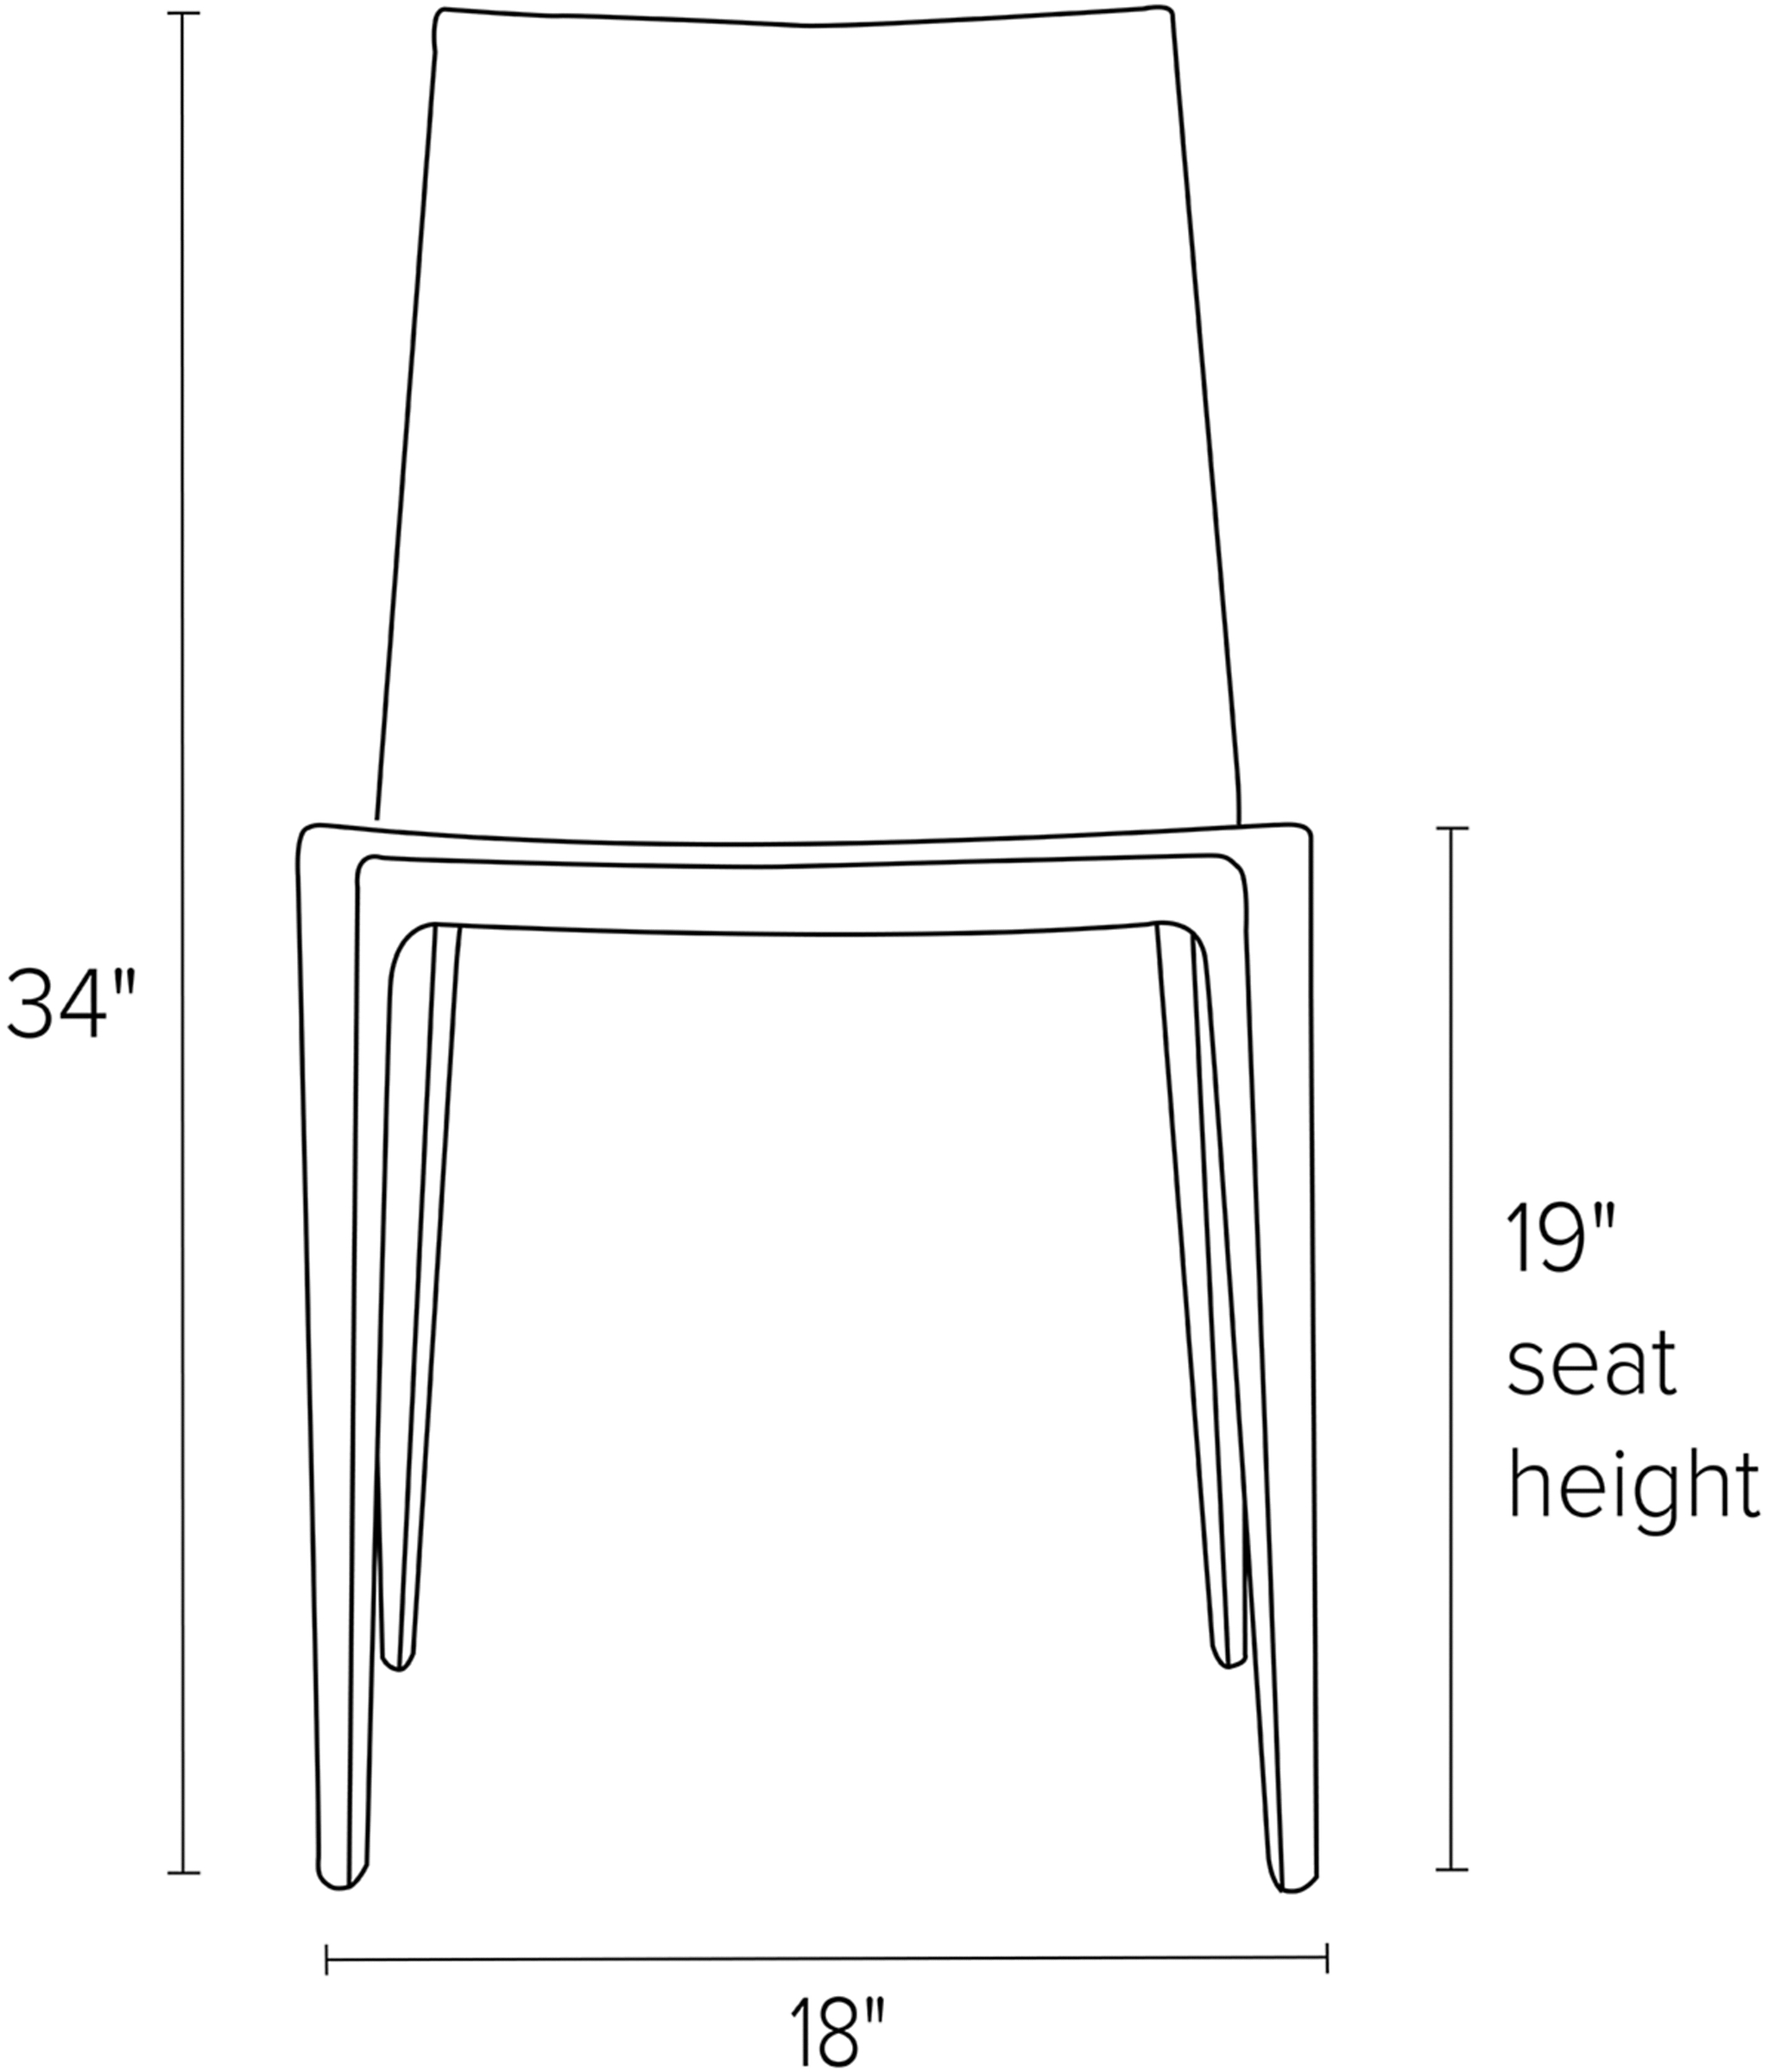 Front view dimension illustration of Bellini chair.